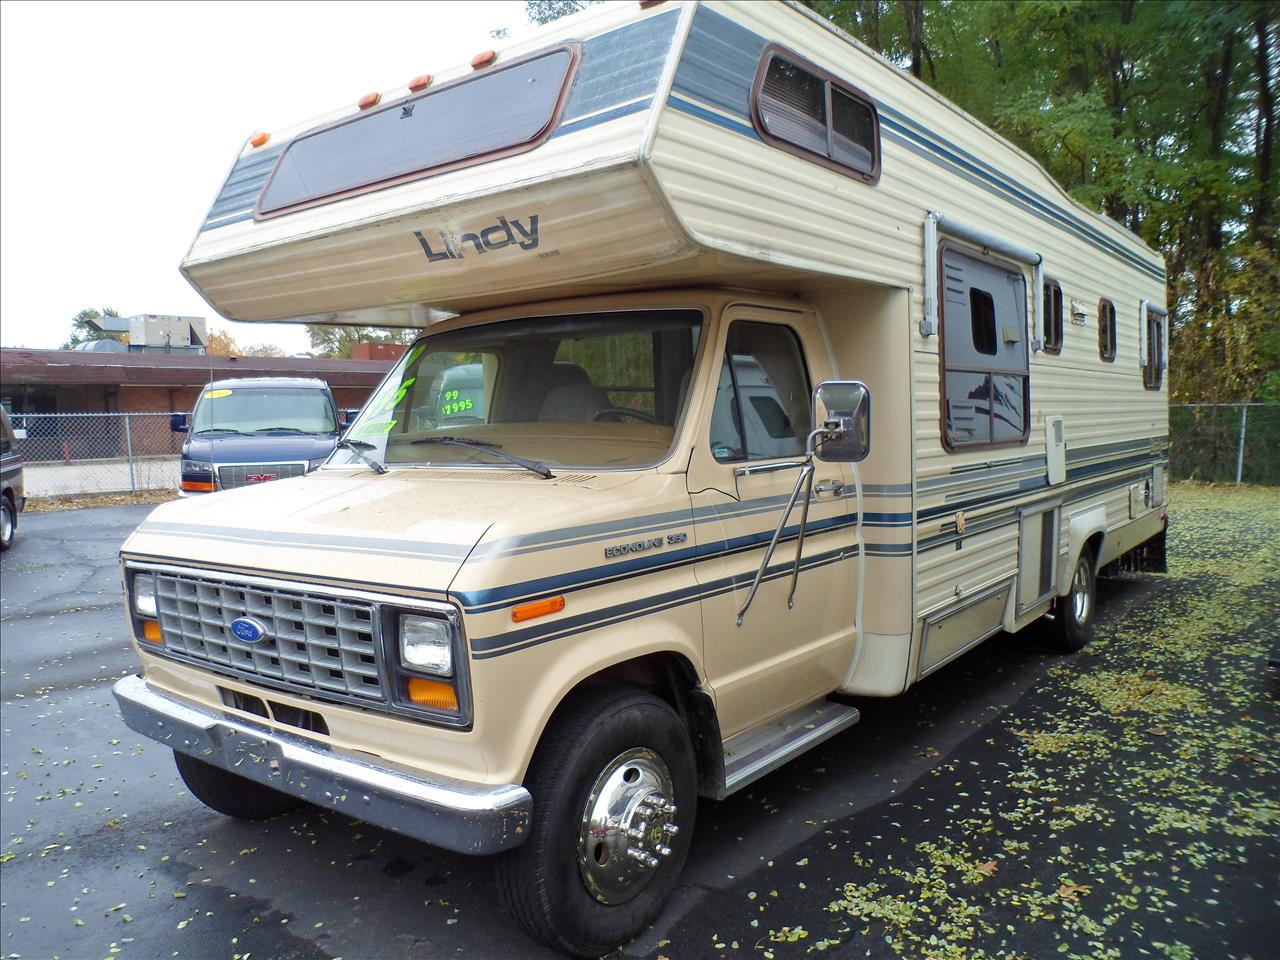 Ford lindy motorhome #8